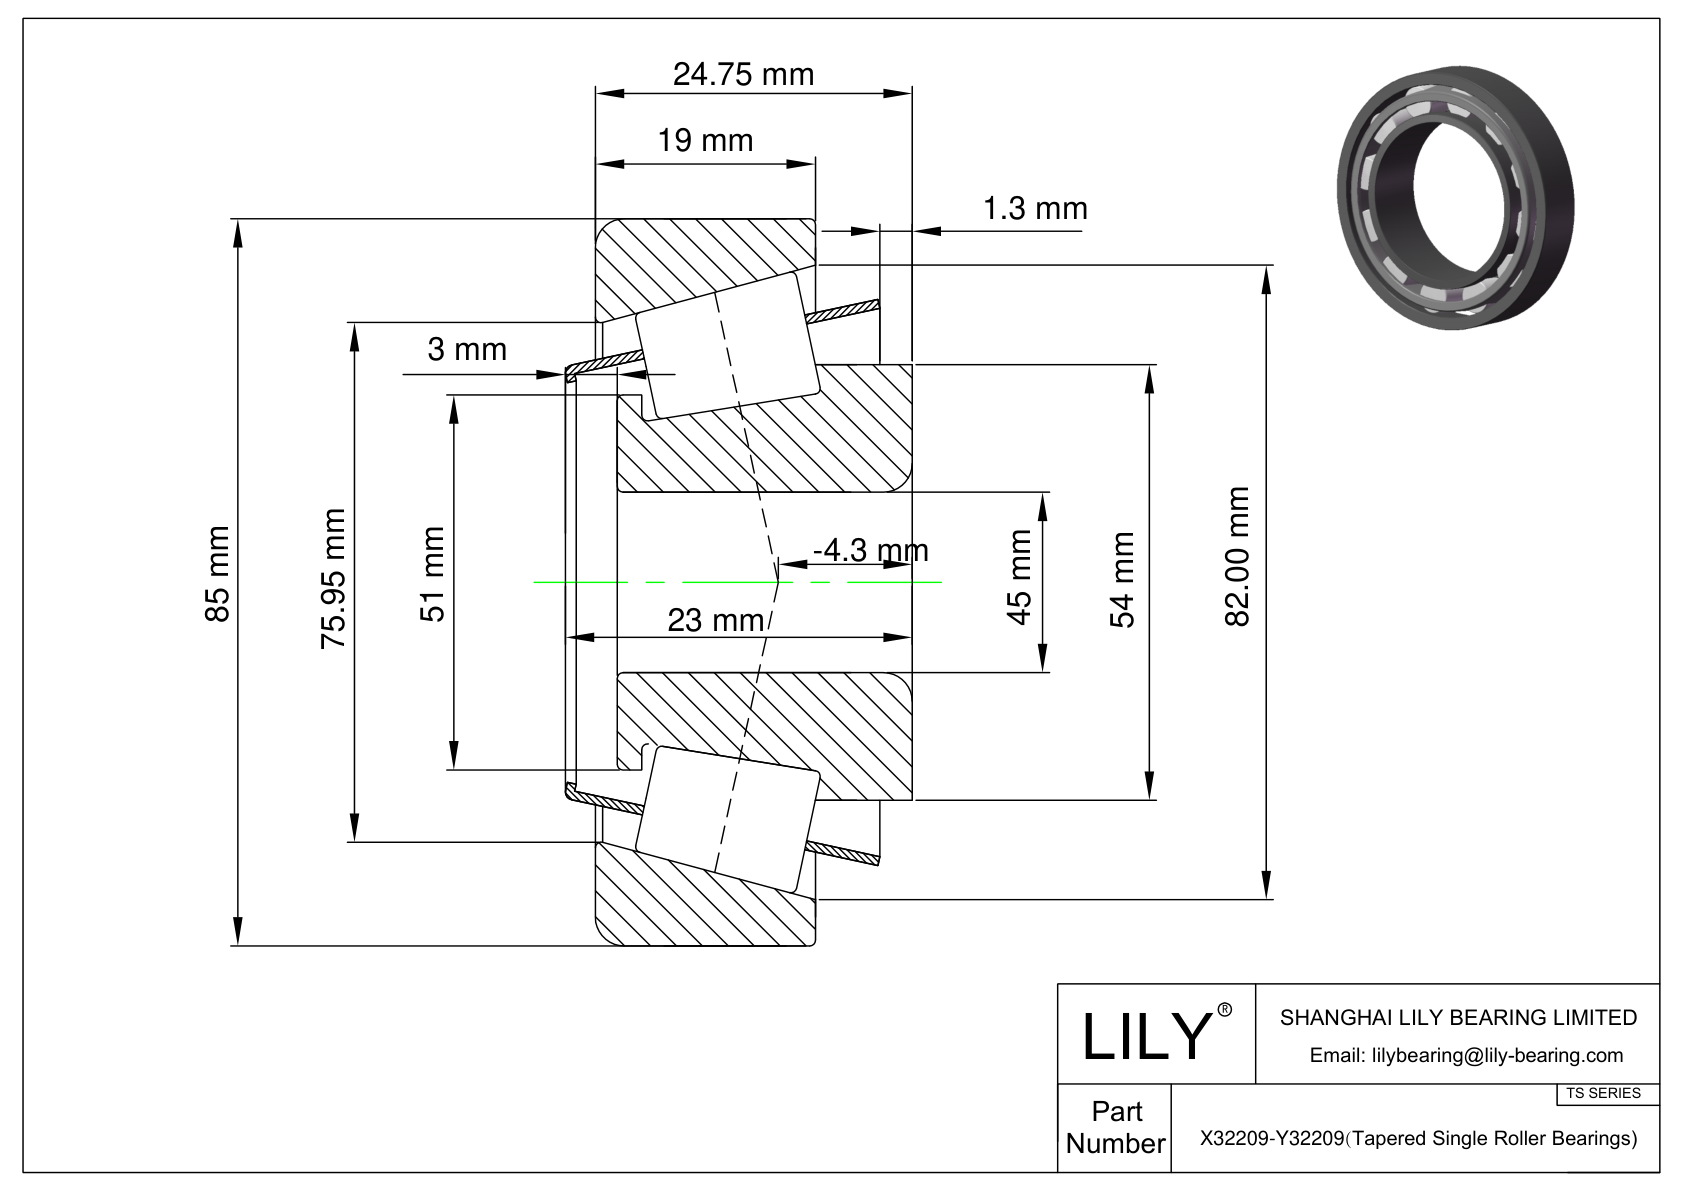 X32209-Y32209 TS (Tapered Single Roller Bearings) (Metric) cad drawing